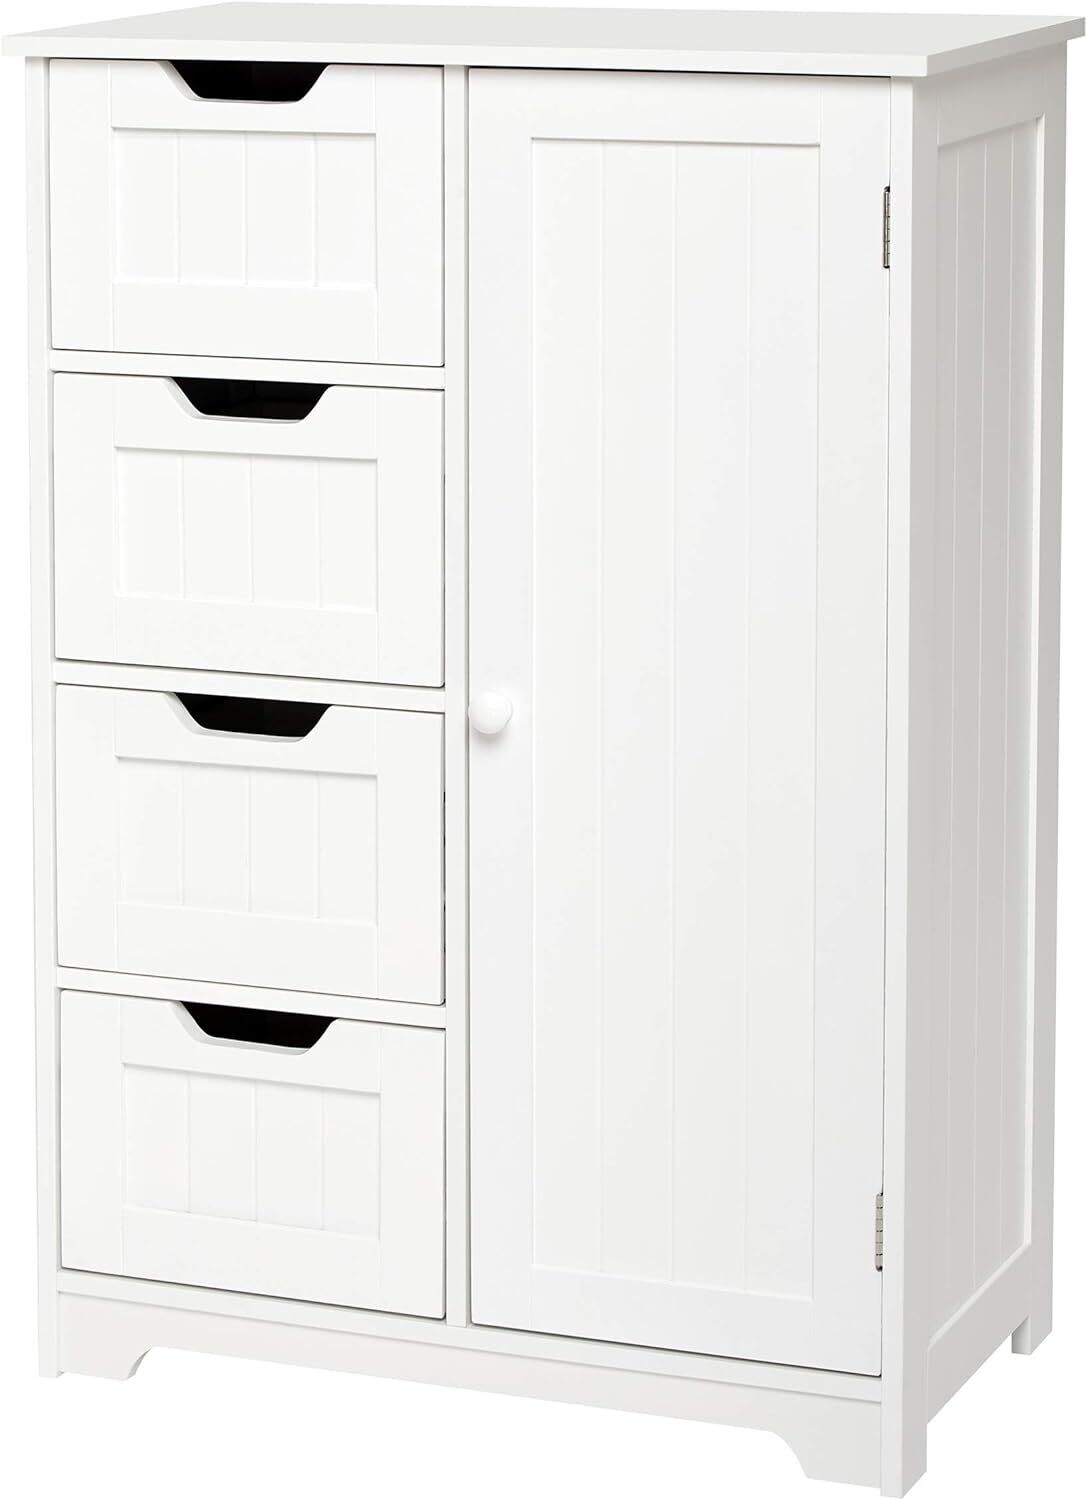 Wooden Storage Unit with 4 Drawers and 1 Door Adjustable Shelf Modern Style Used in Bathroom Living Room Bedroom Kitchen Room, White